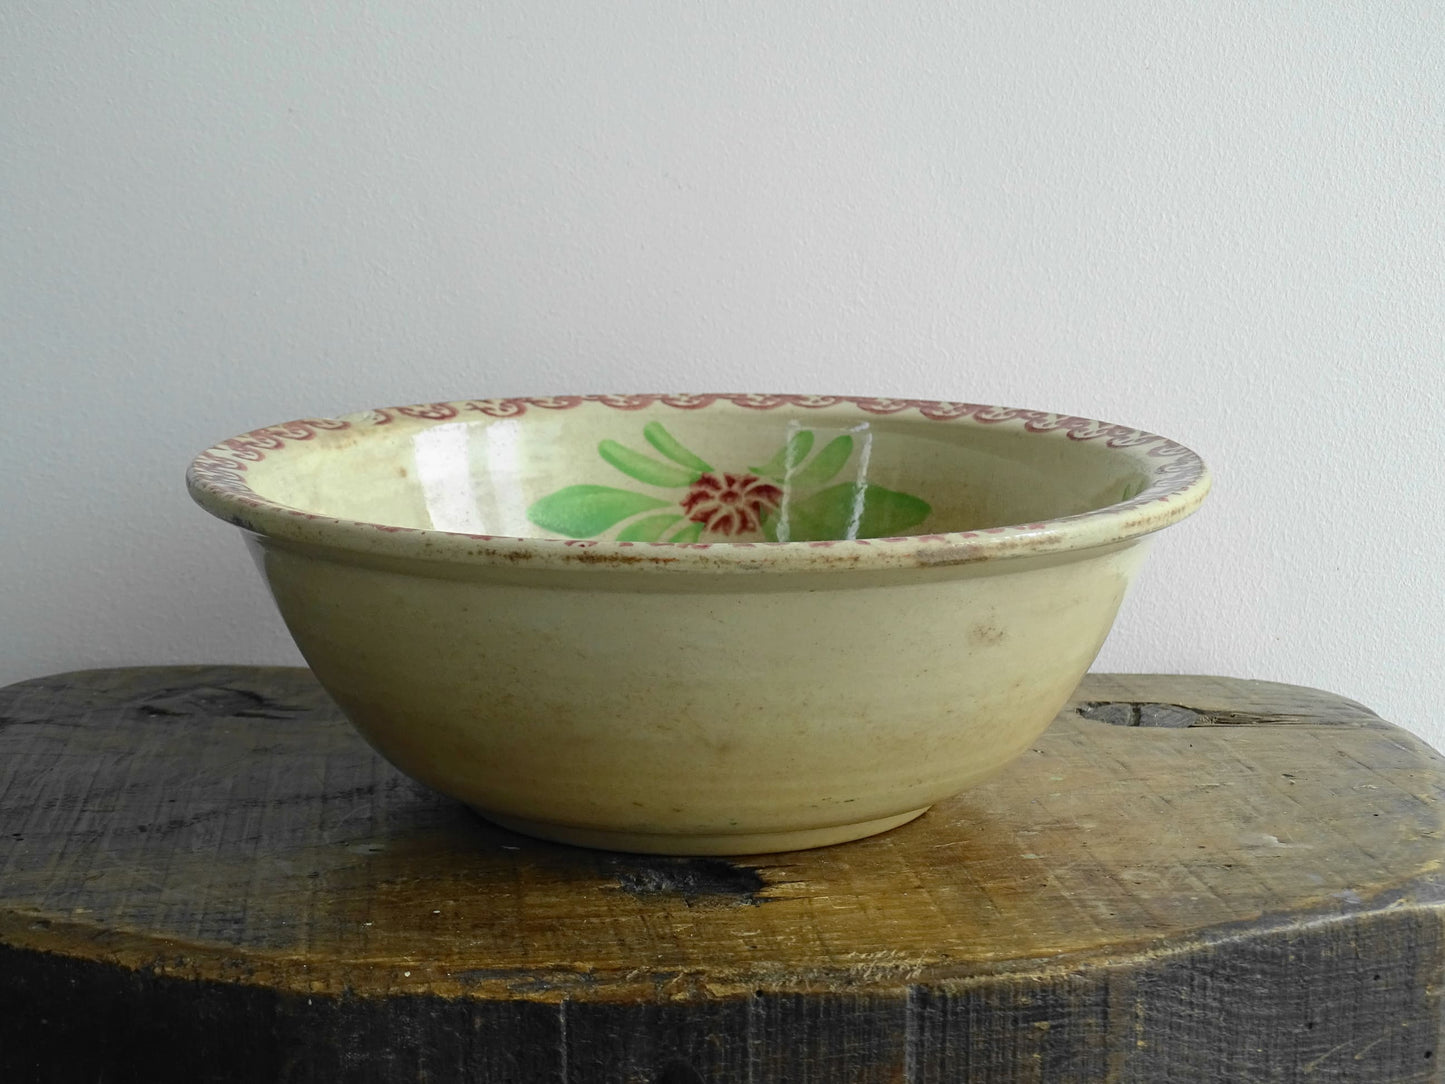 Antique Saint Amand Salad Bowl with Figure of a man and foliage and flower decoration